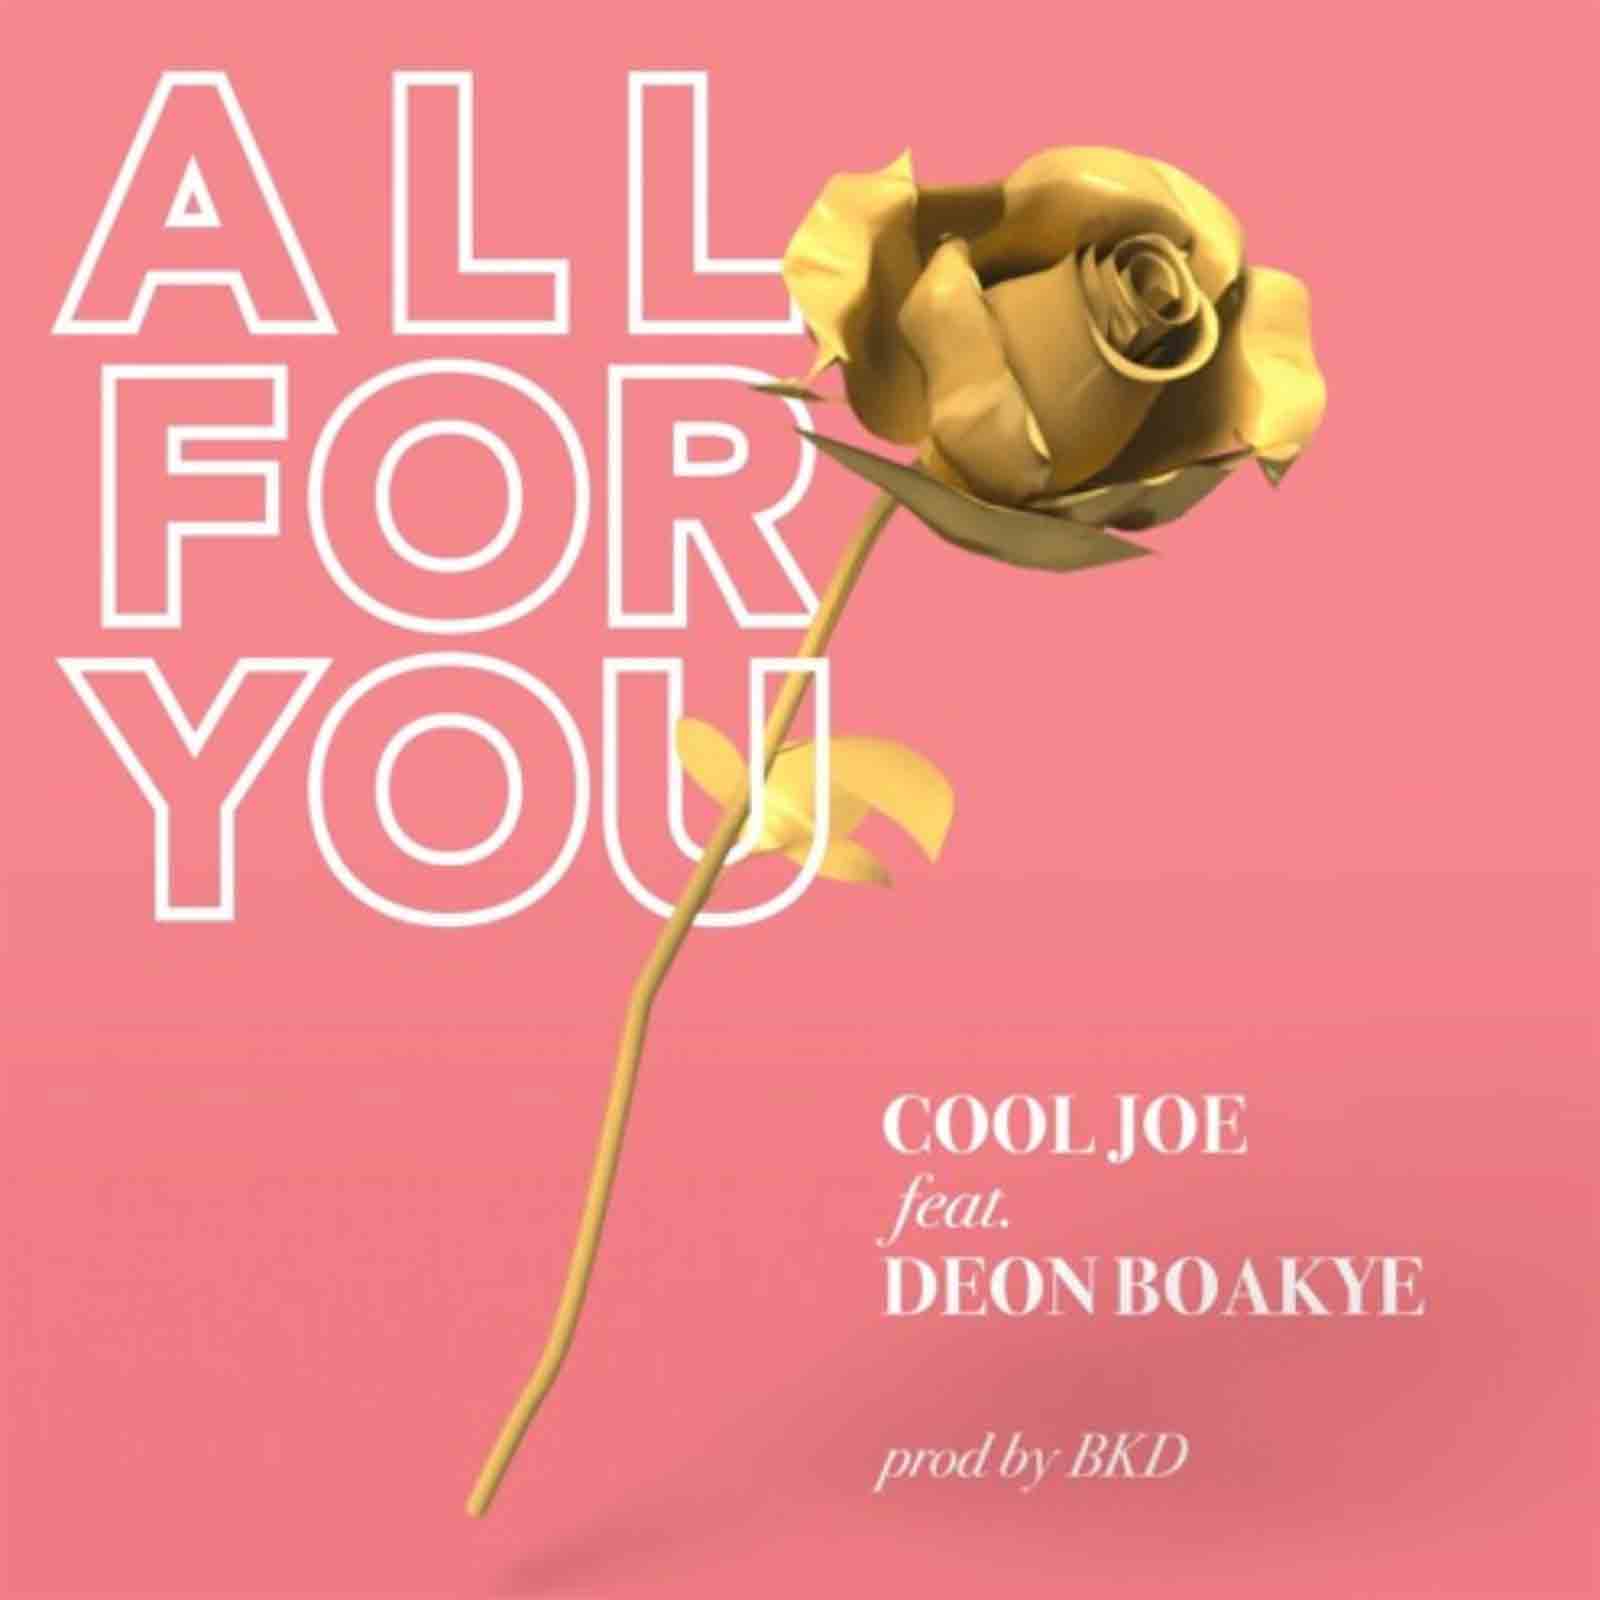 All For You by Cool Joe feat. Deon Boakye